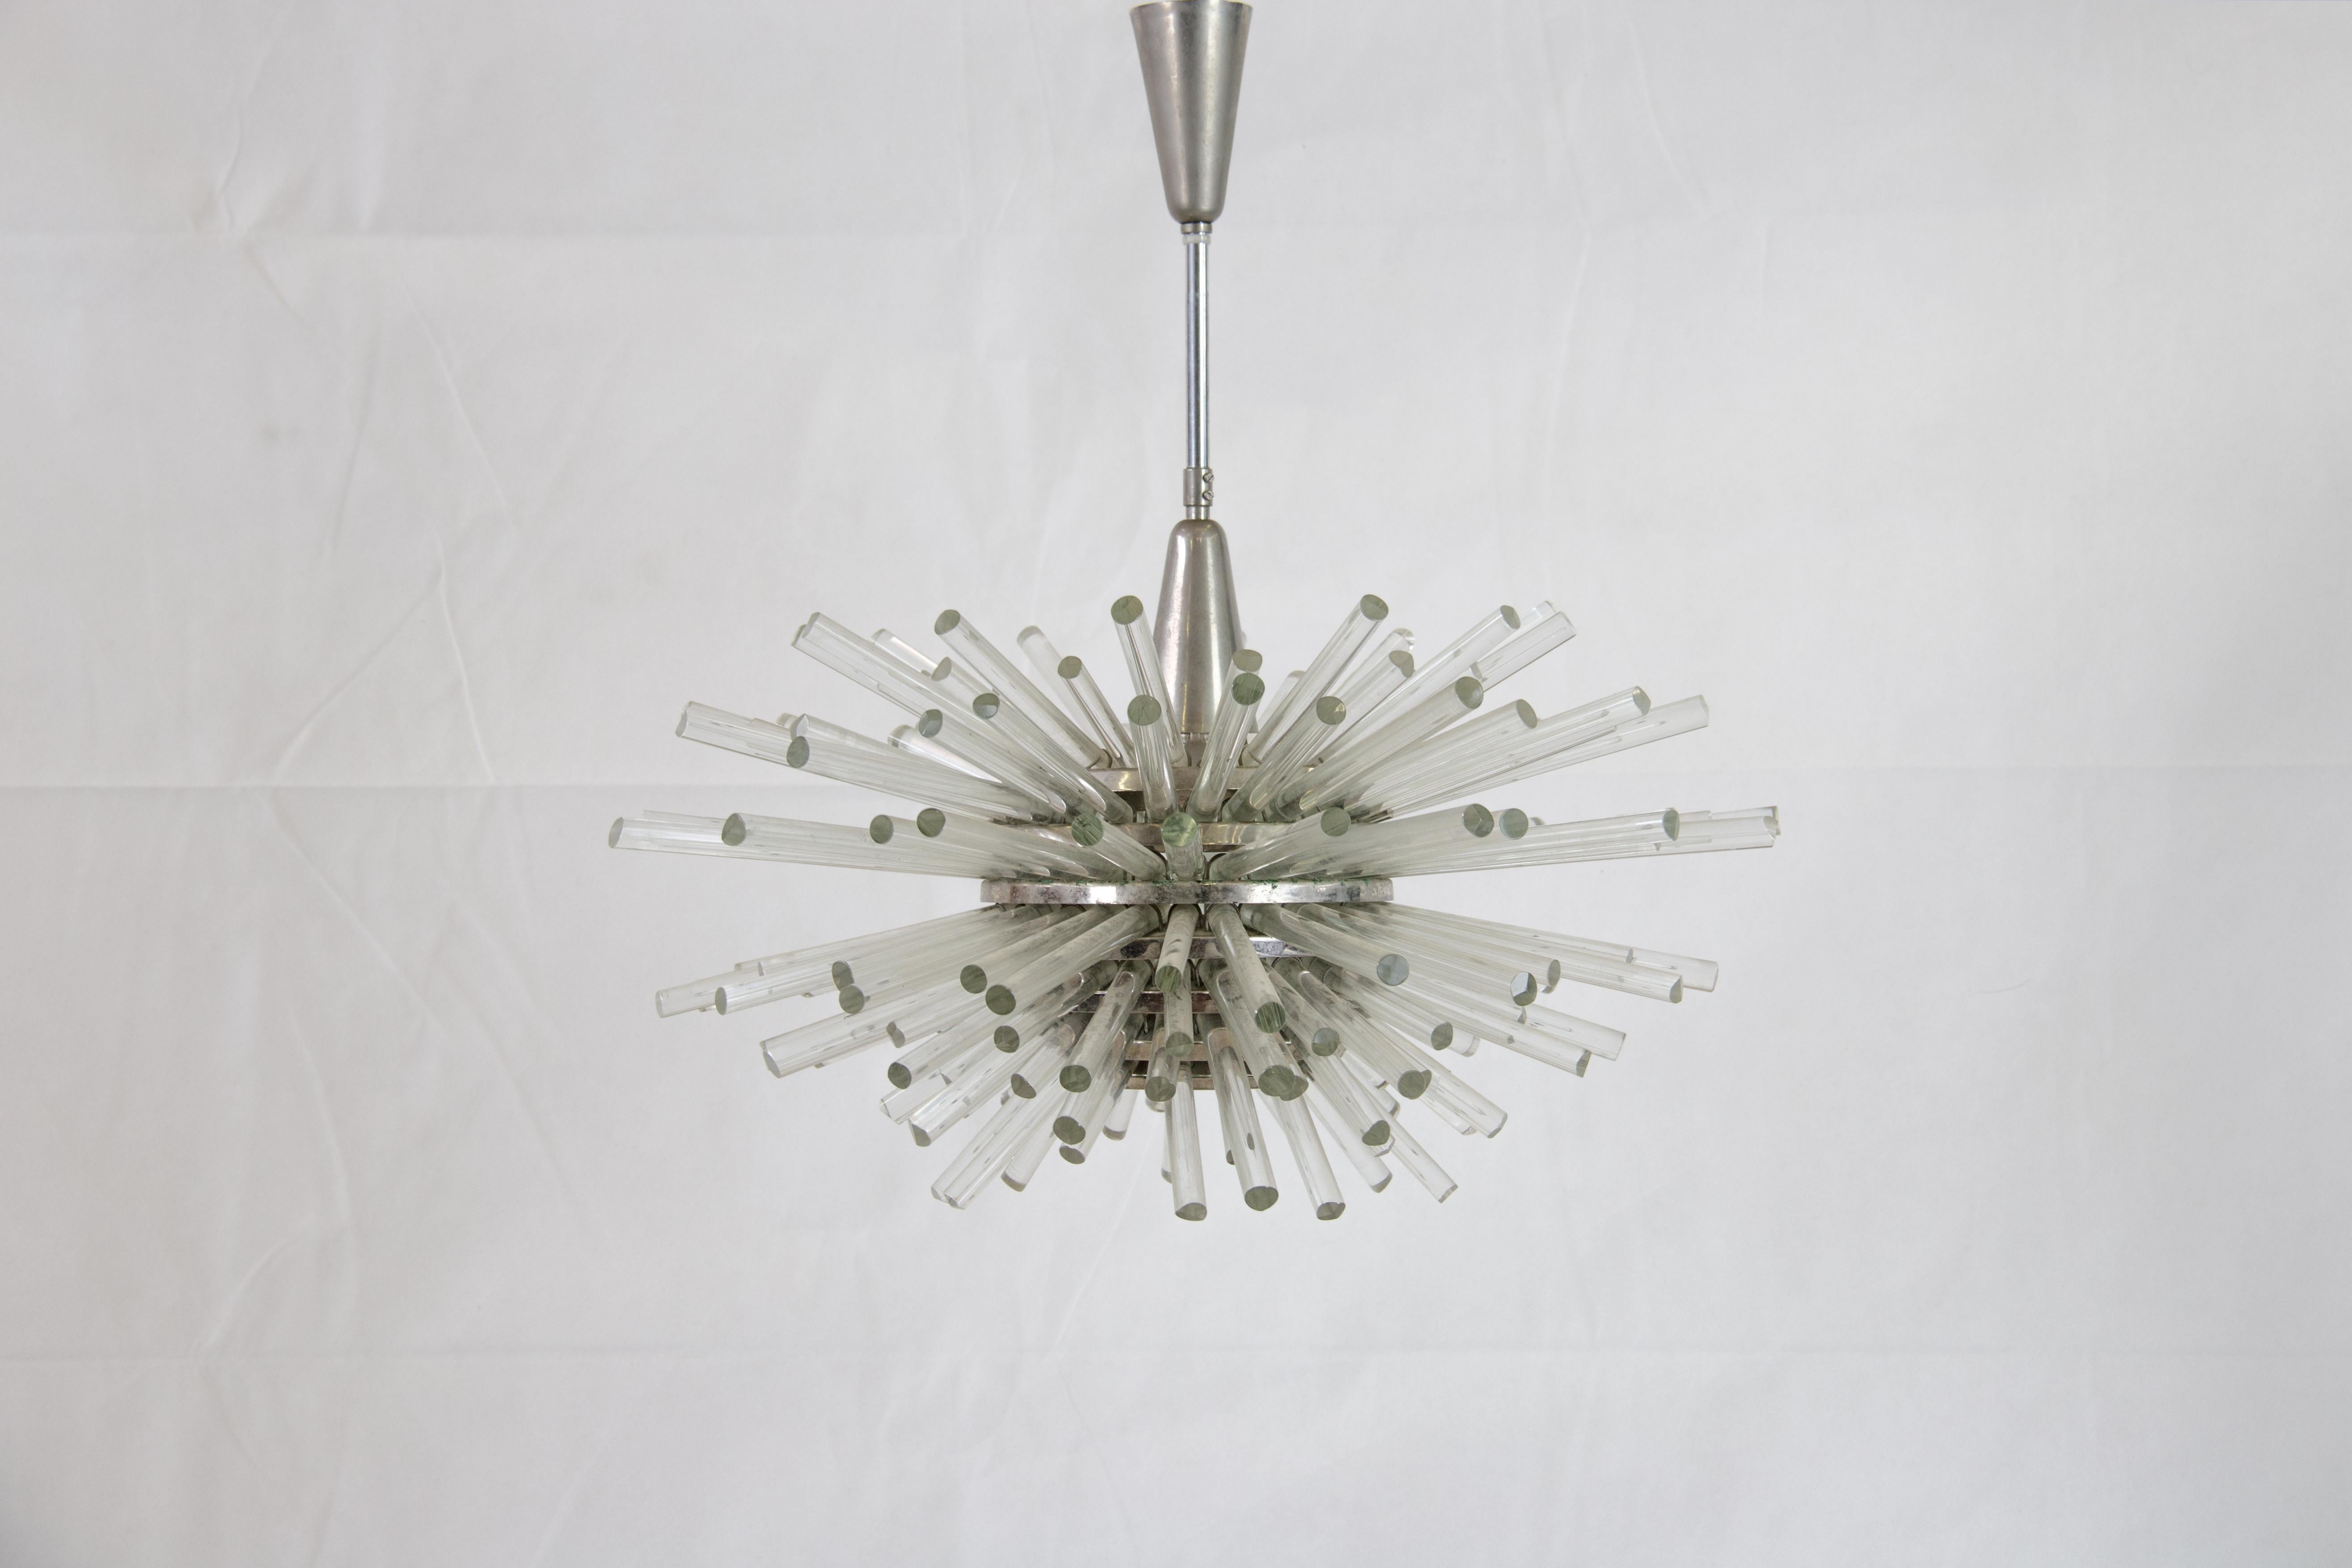 Chandelier by Bakolowits & Söhne.